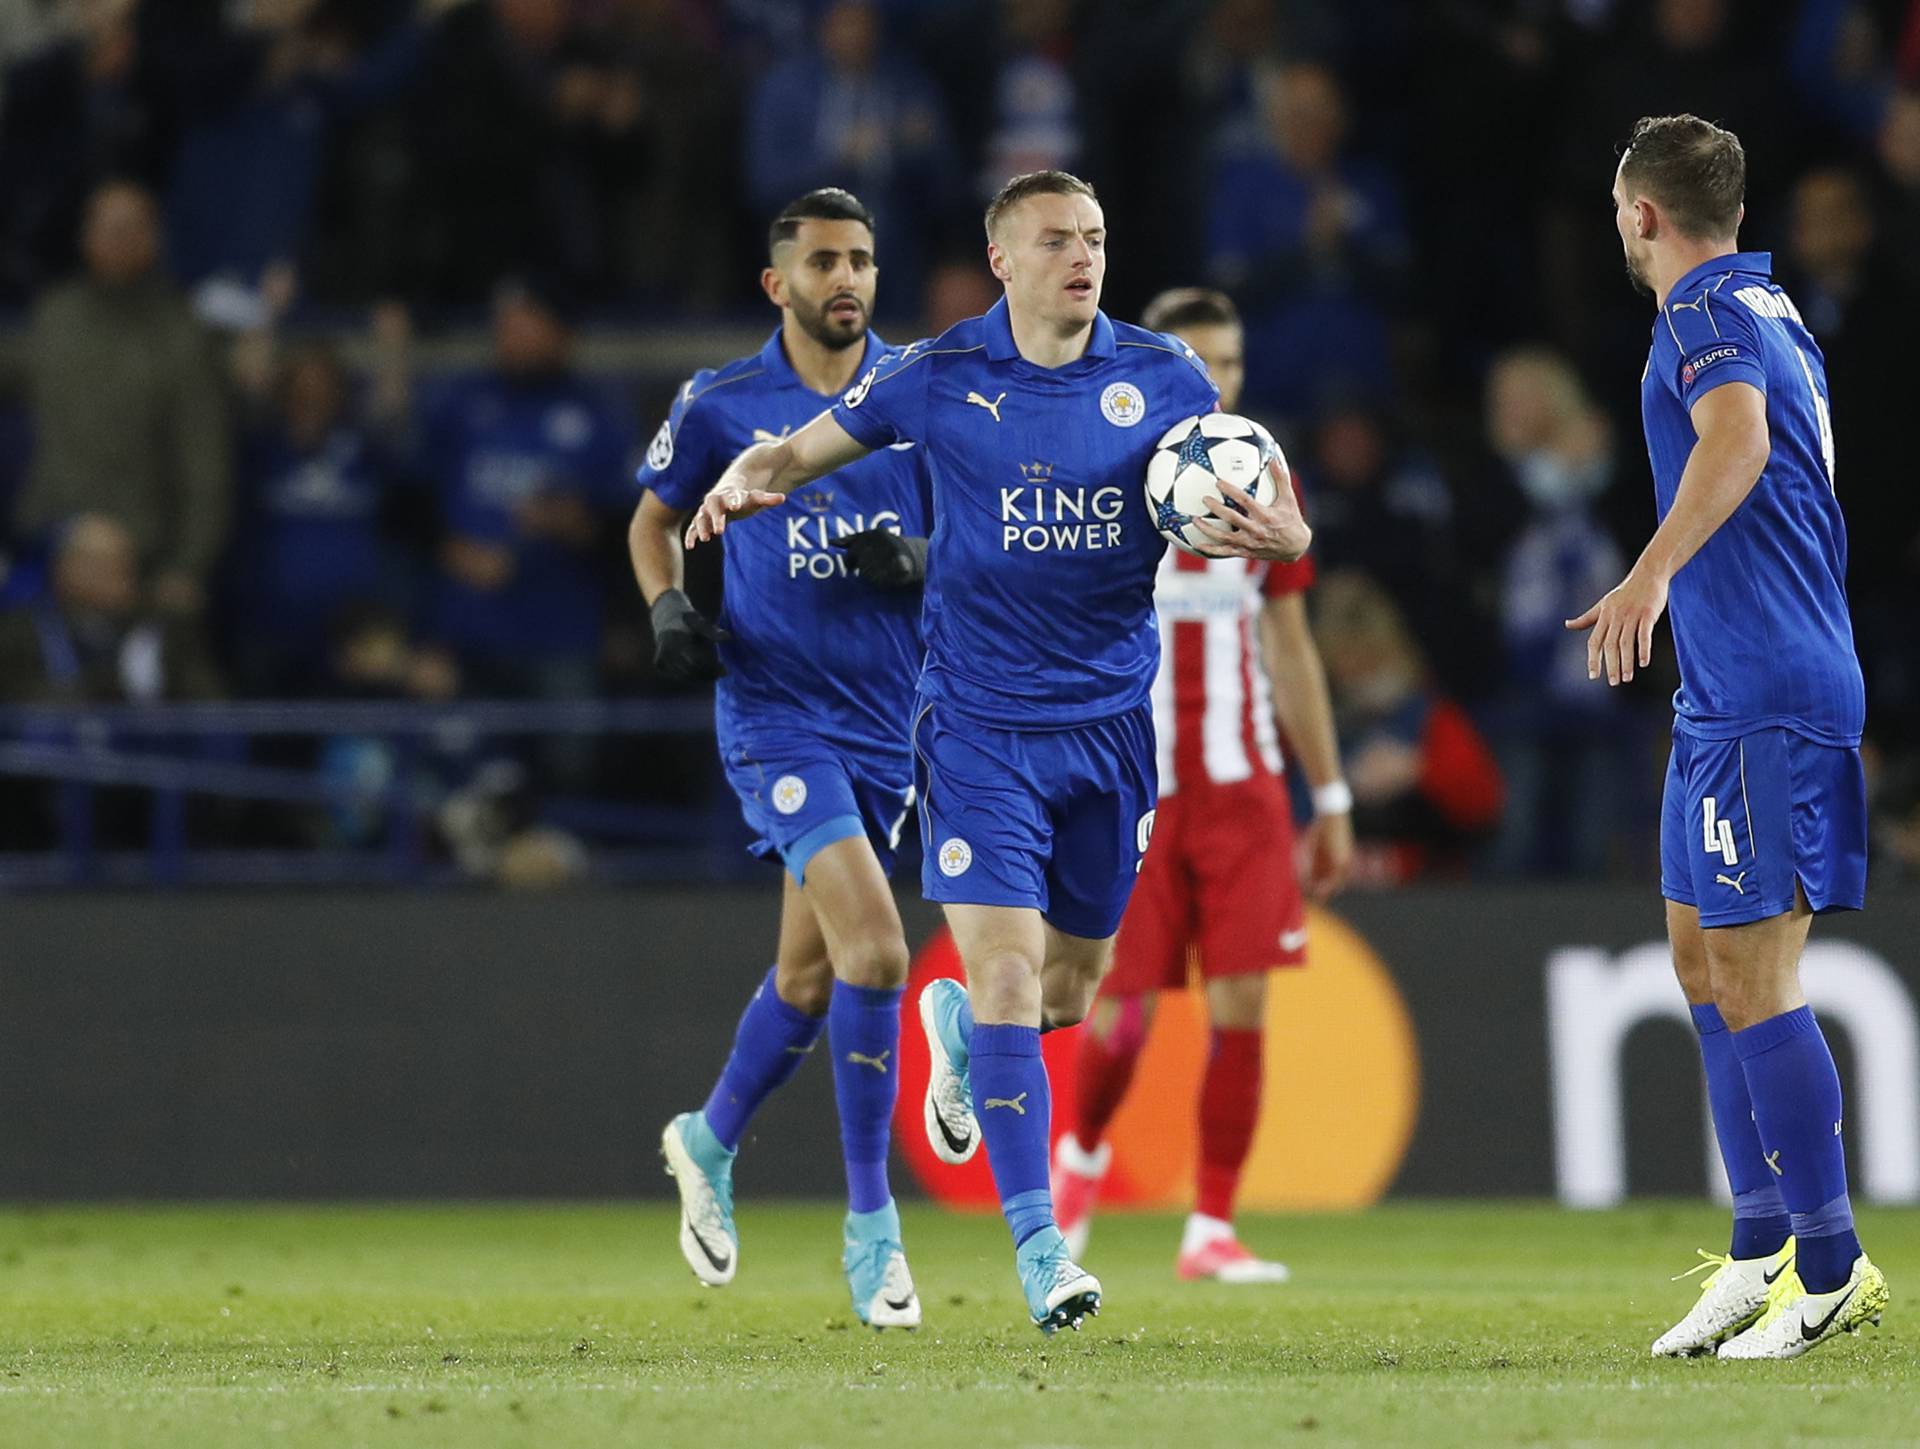 Leicester City's Jamie Vardy celebrates scoring their first goal with team mates